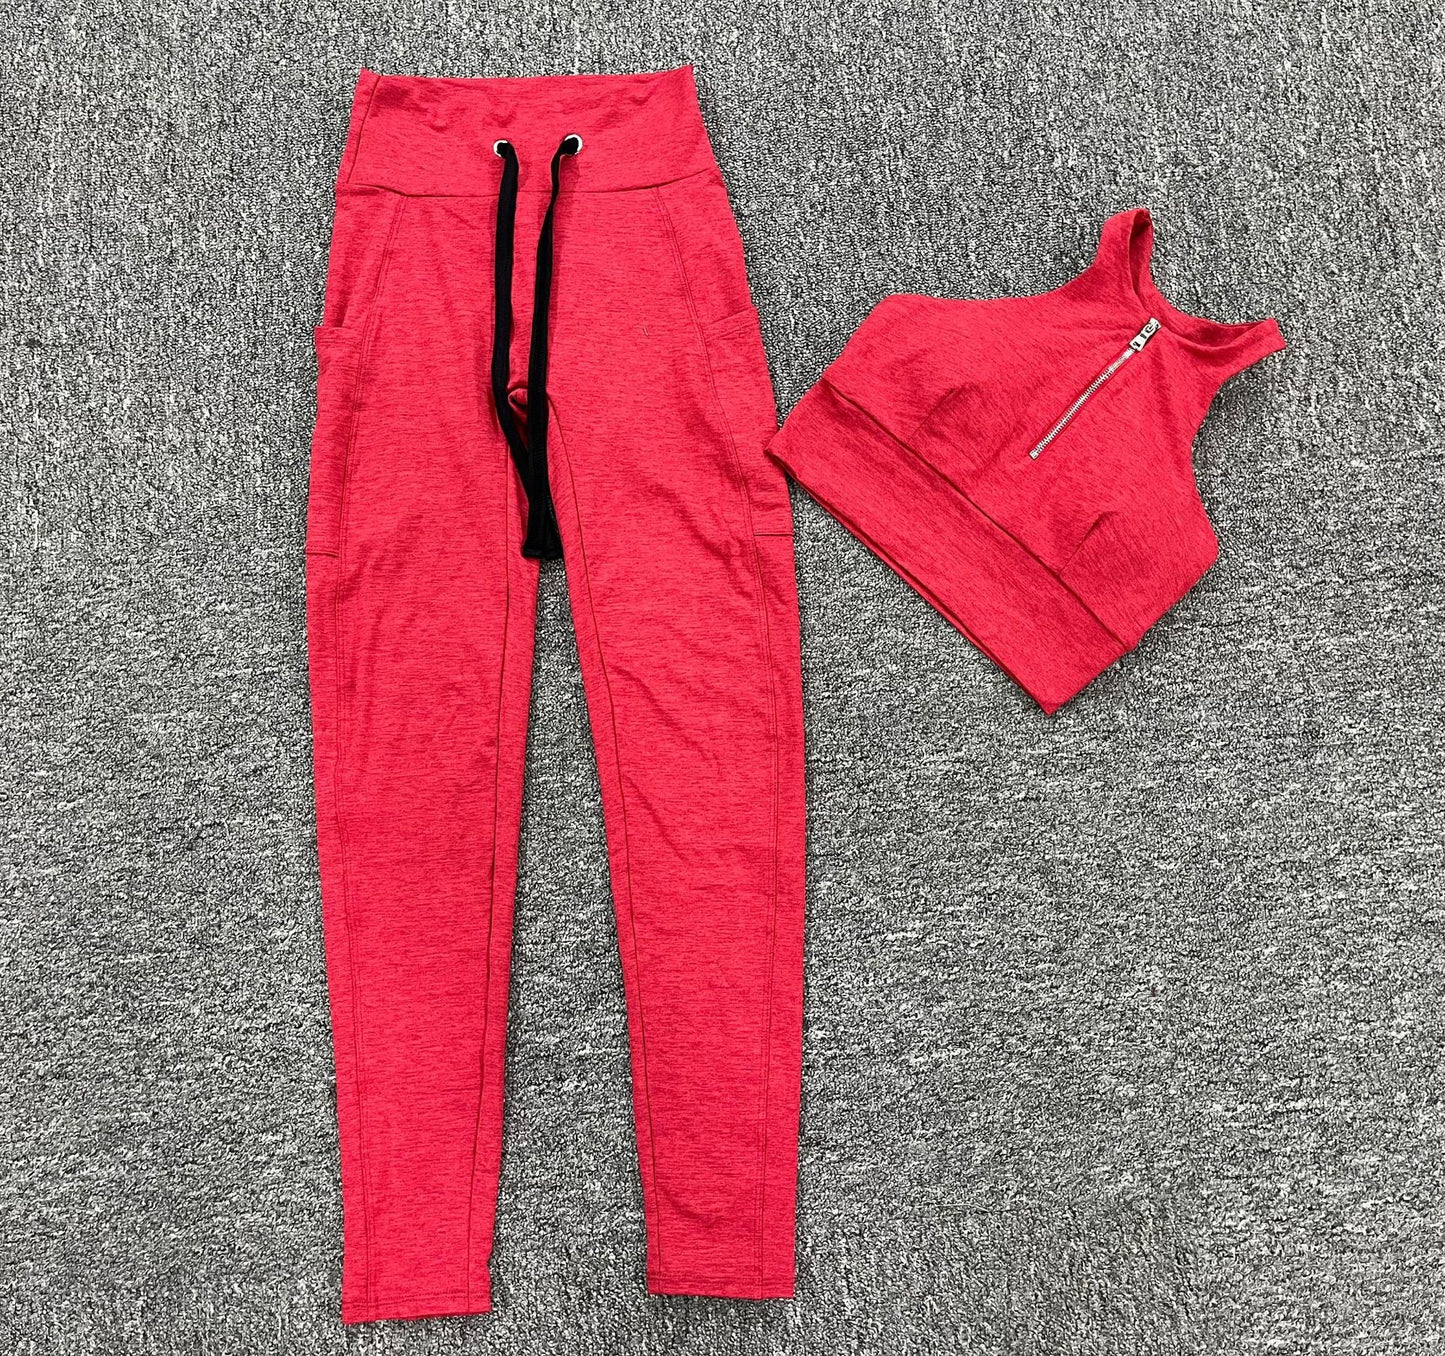 Sexy Drawstring Elastic Sports Yoga Suits for Women-Activewear-Free Shipping at meselling99